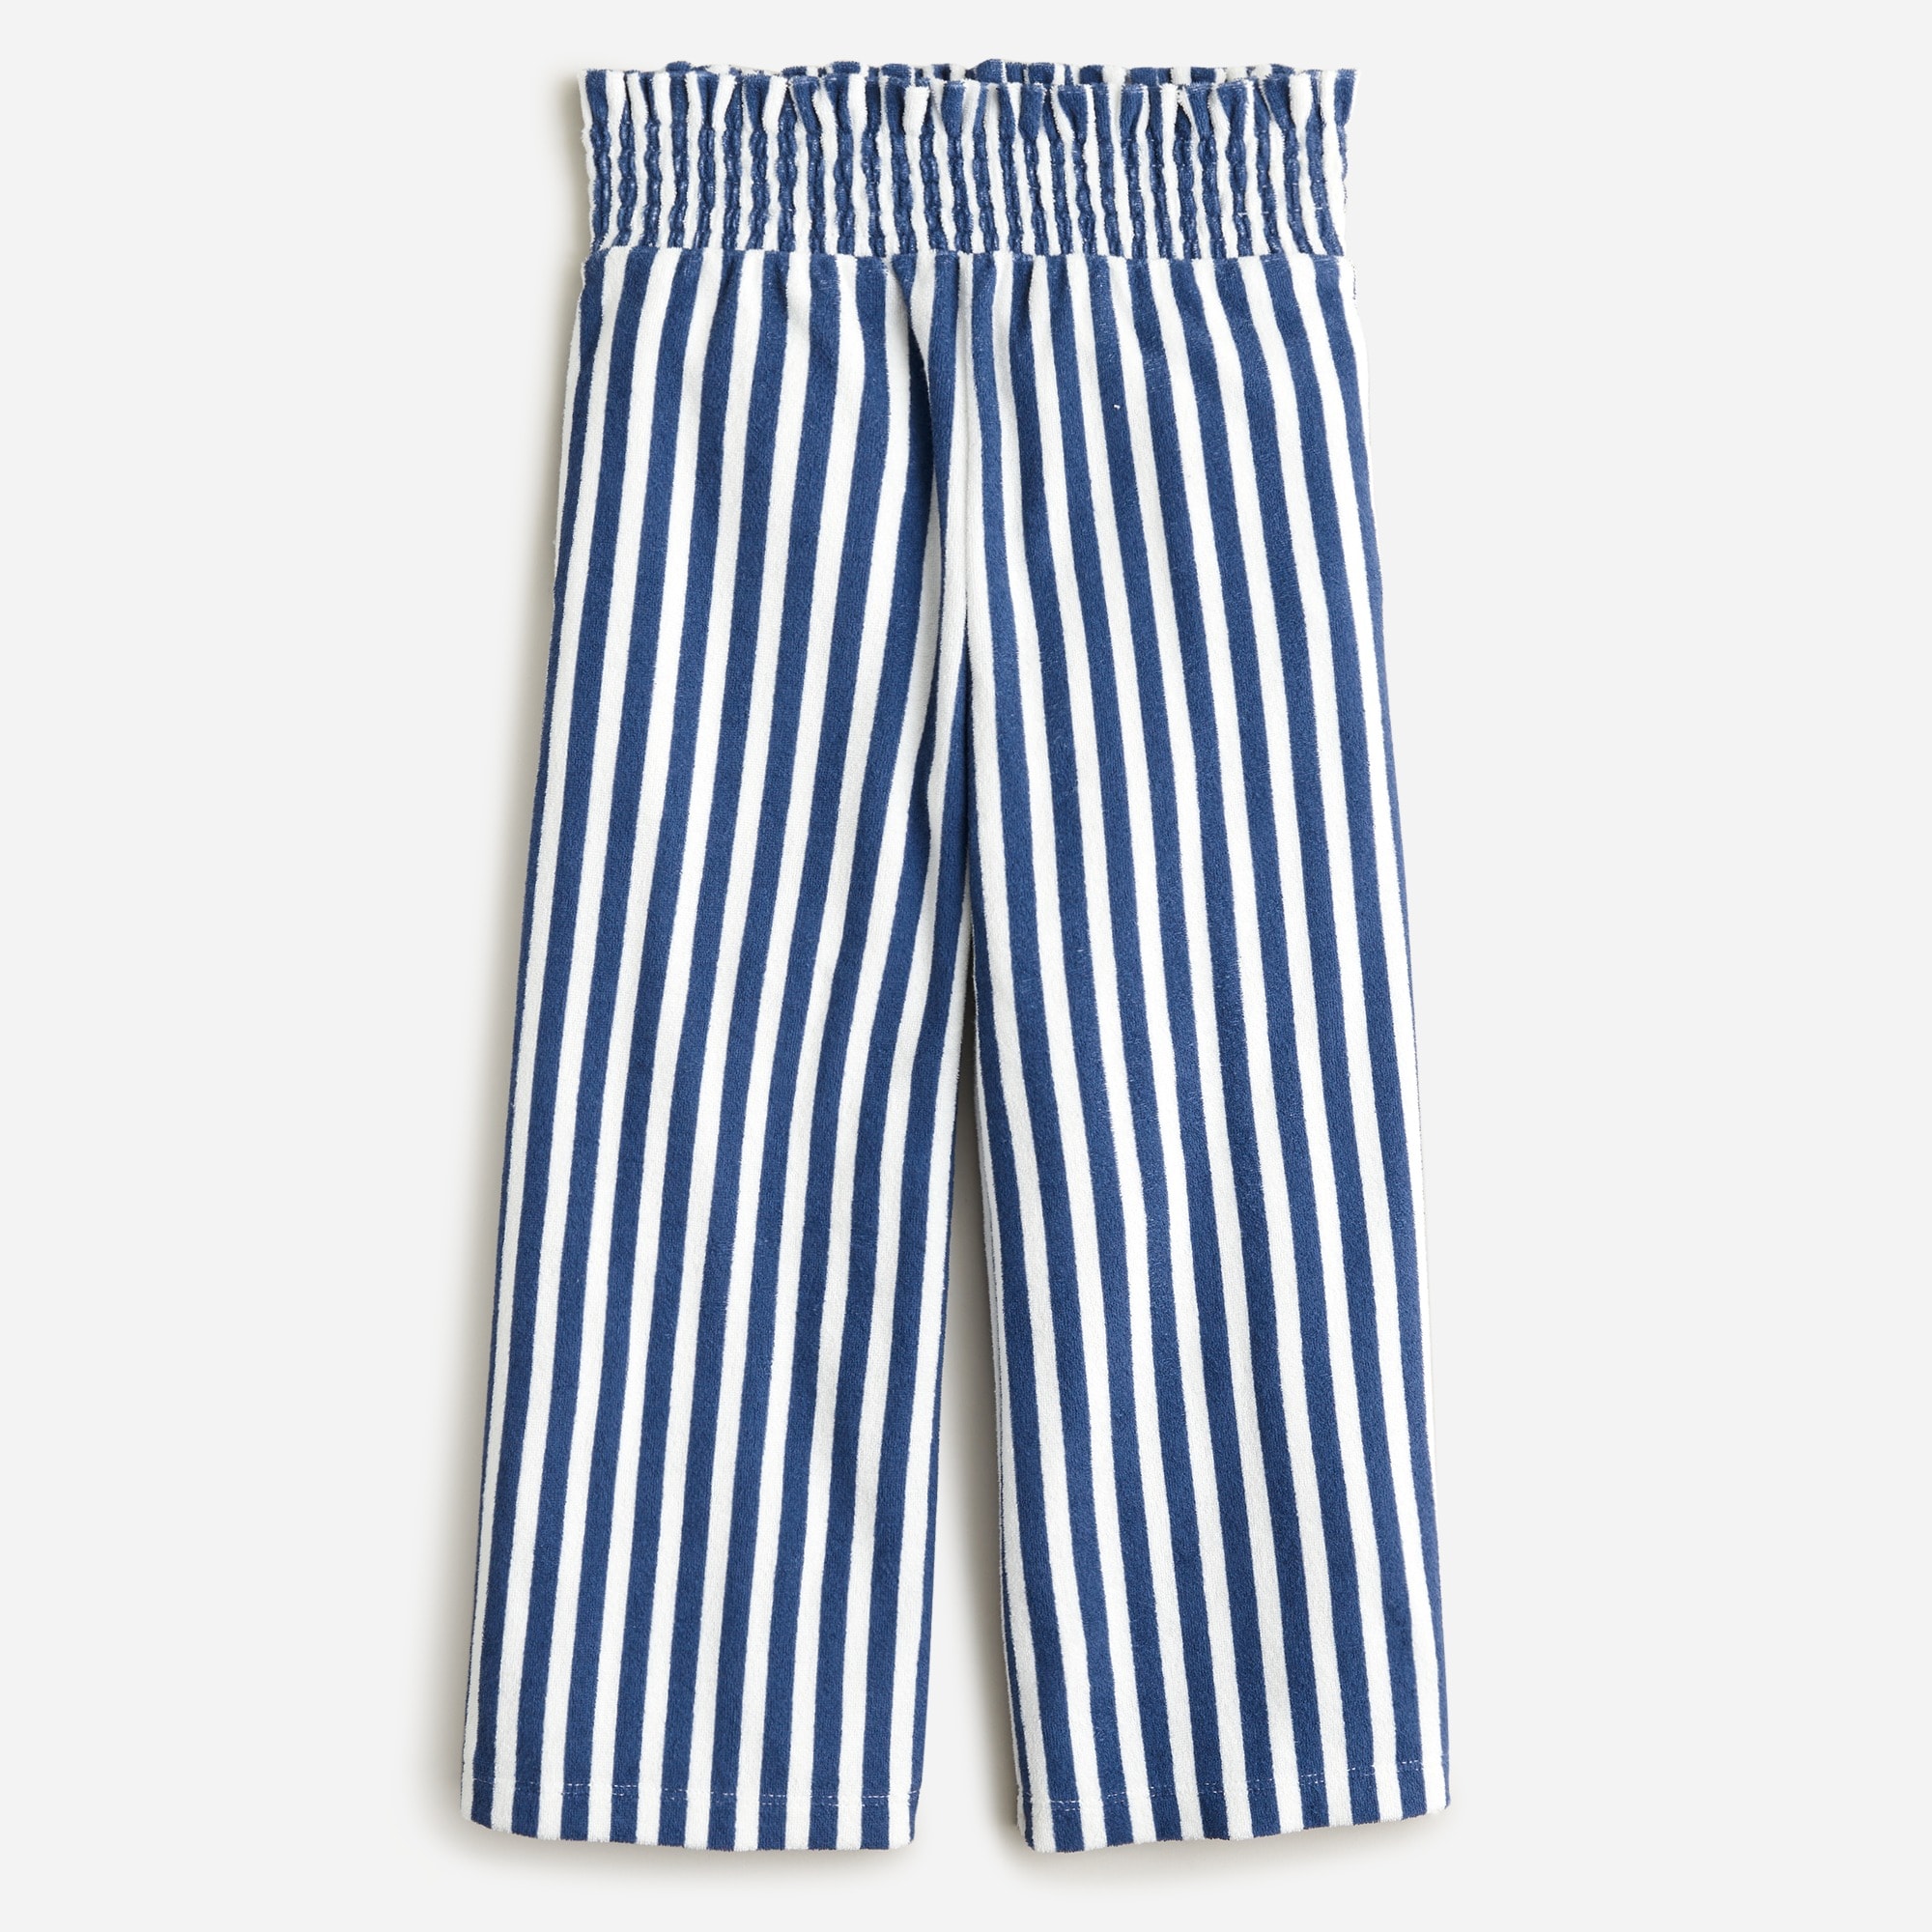  Girls' wide-leg pant in striped towel terry